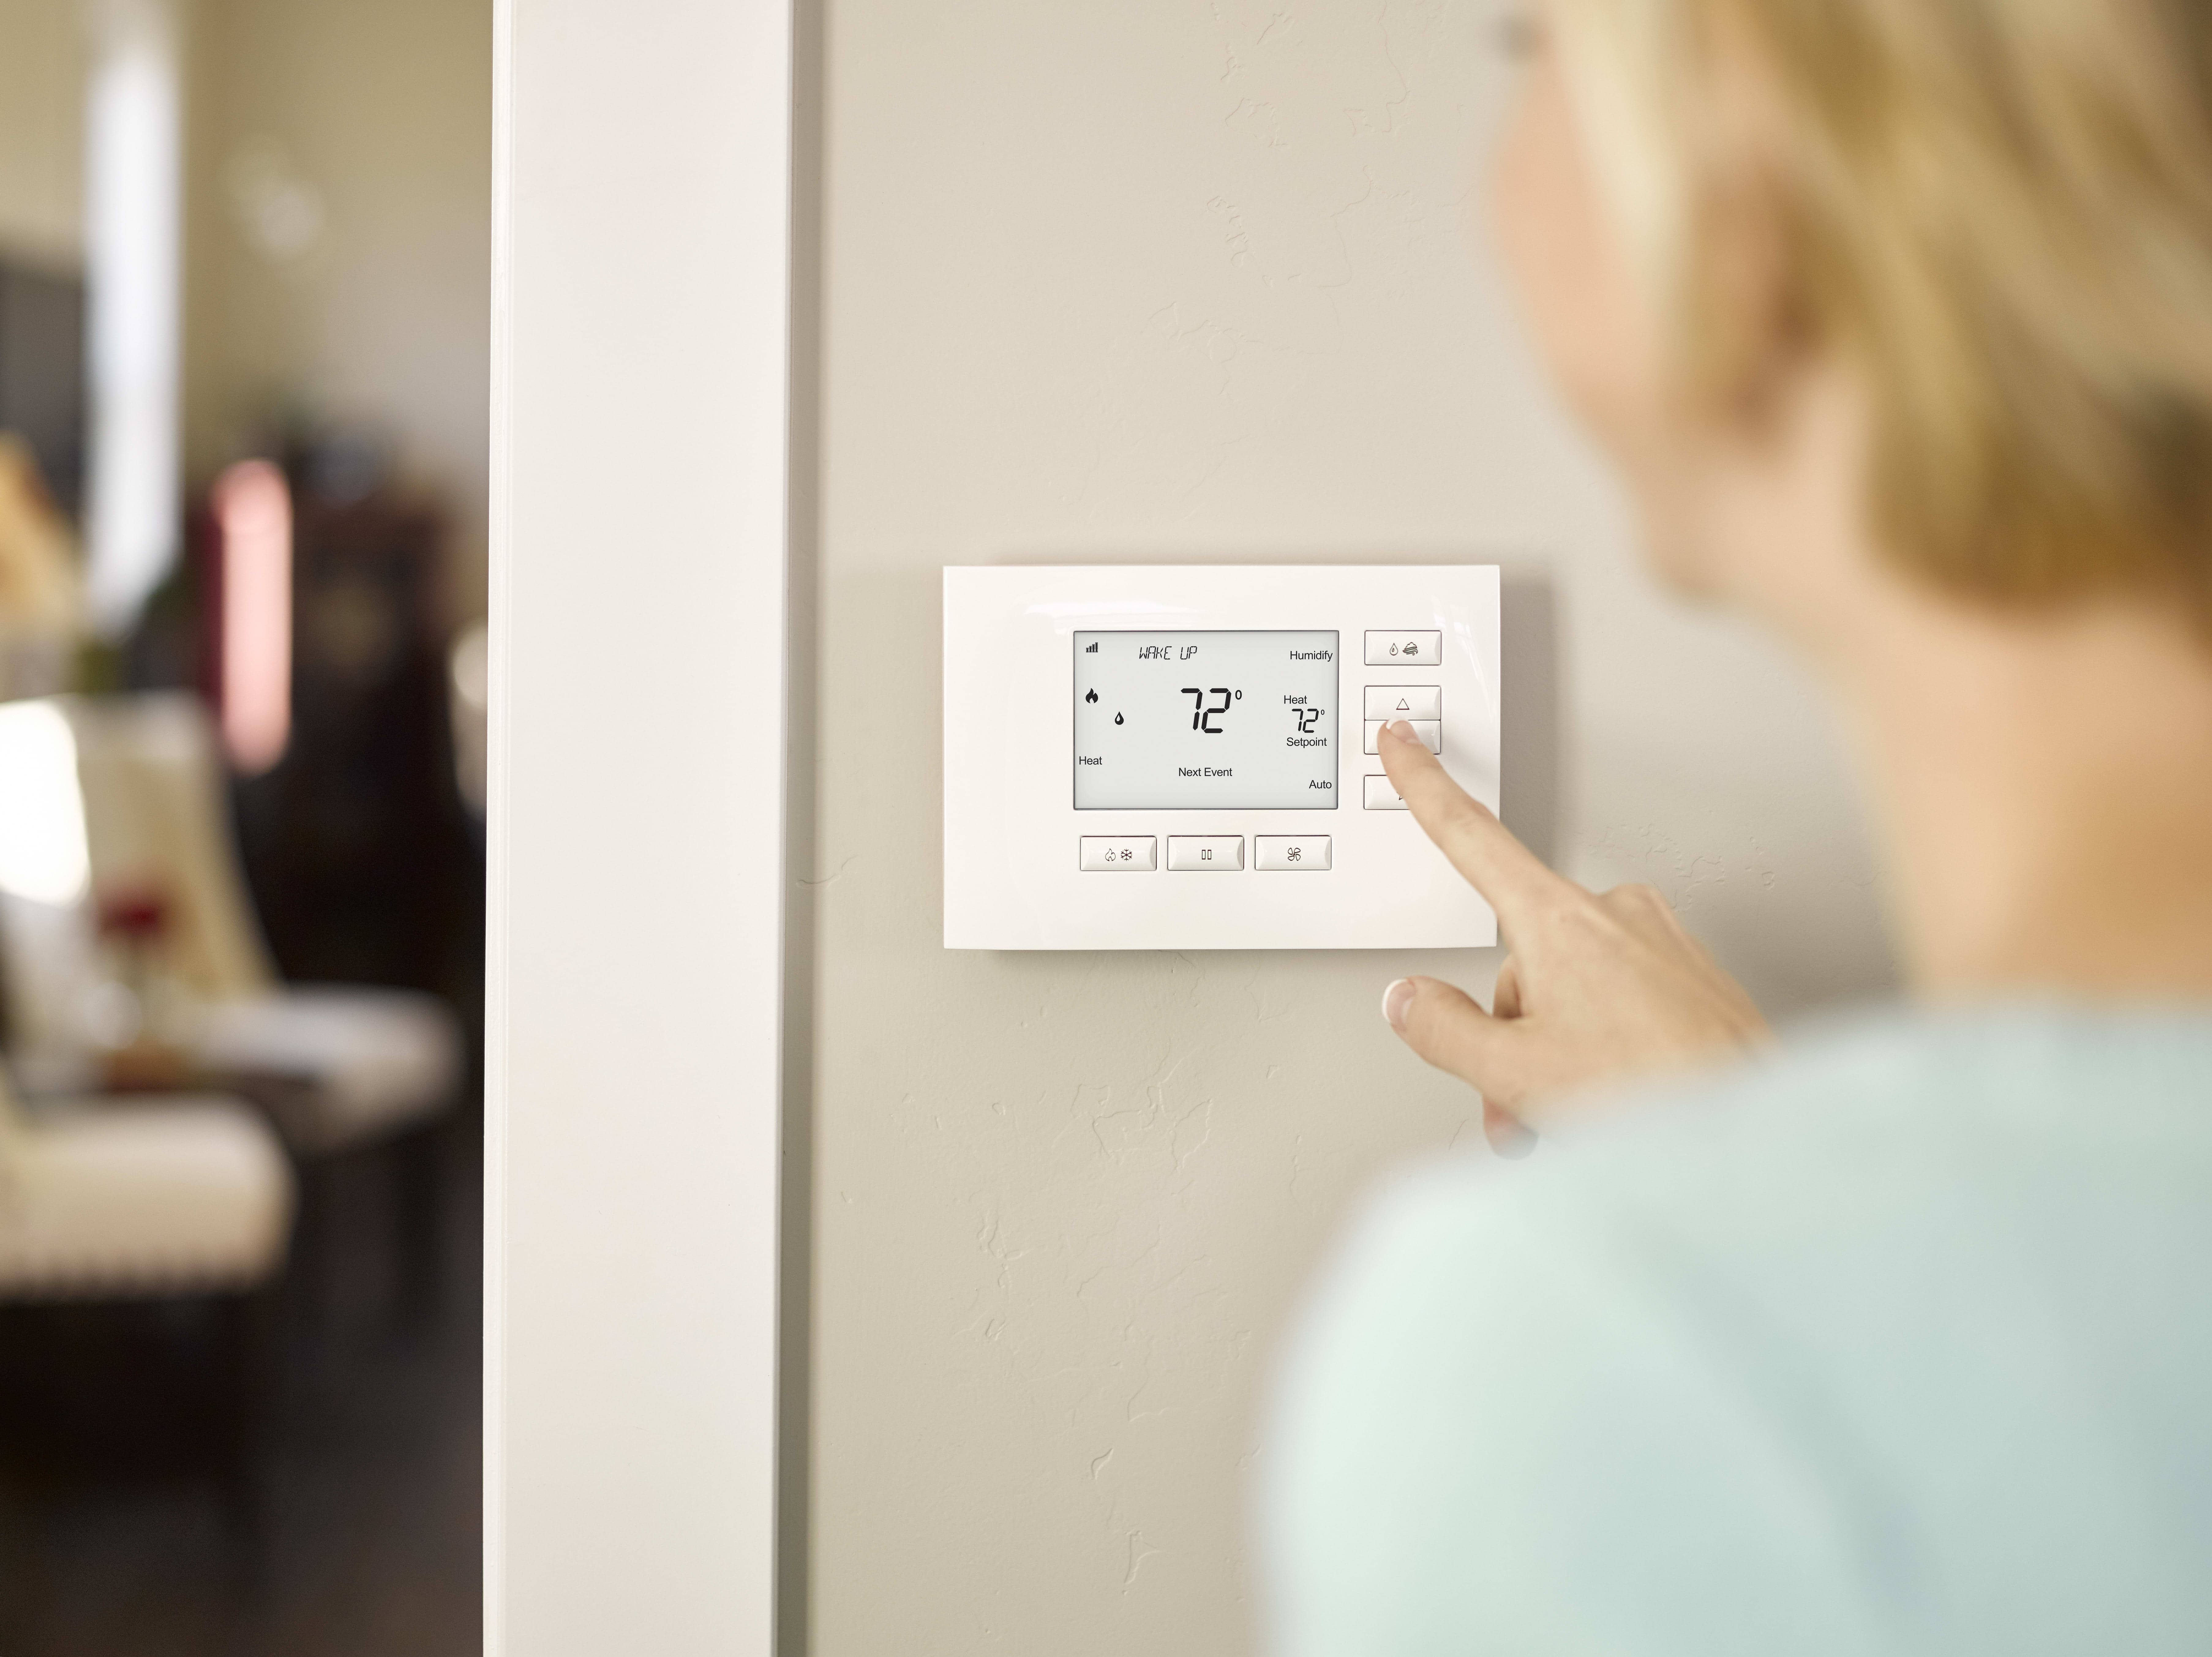 C4_Images_Comfort_4 - 5 common home automation mistakes